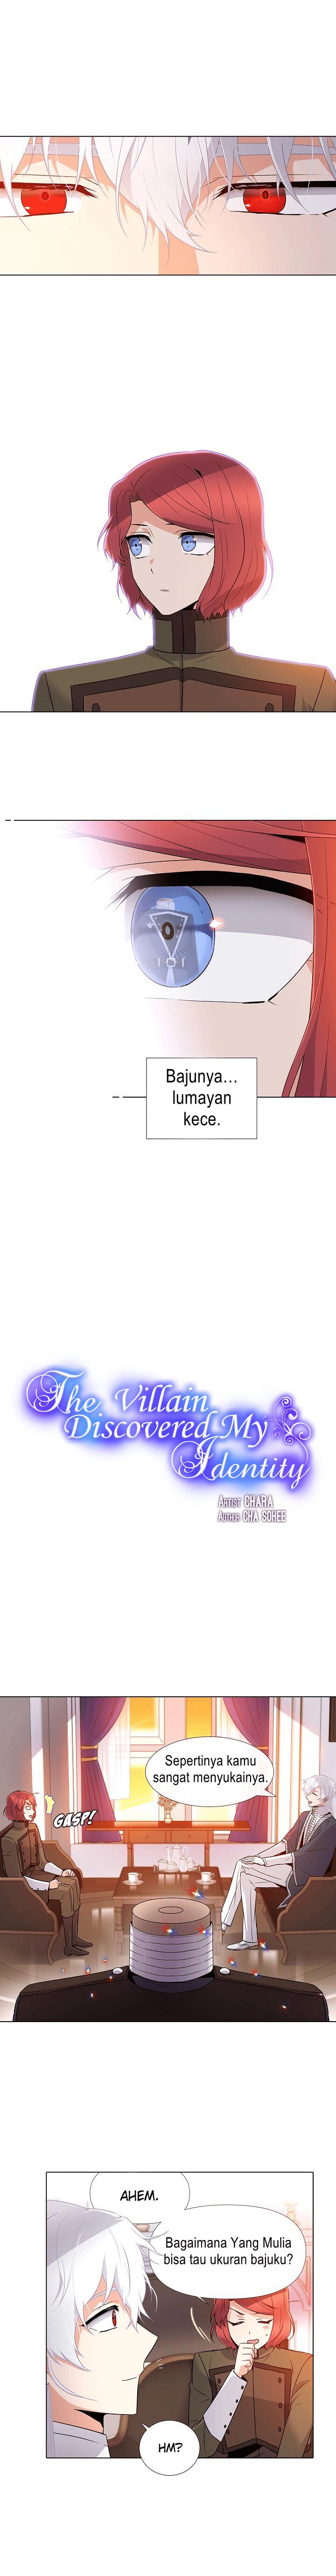 The Villain Discovered My Identity Chapter 15